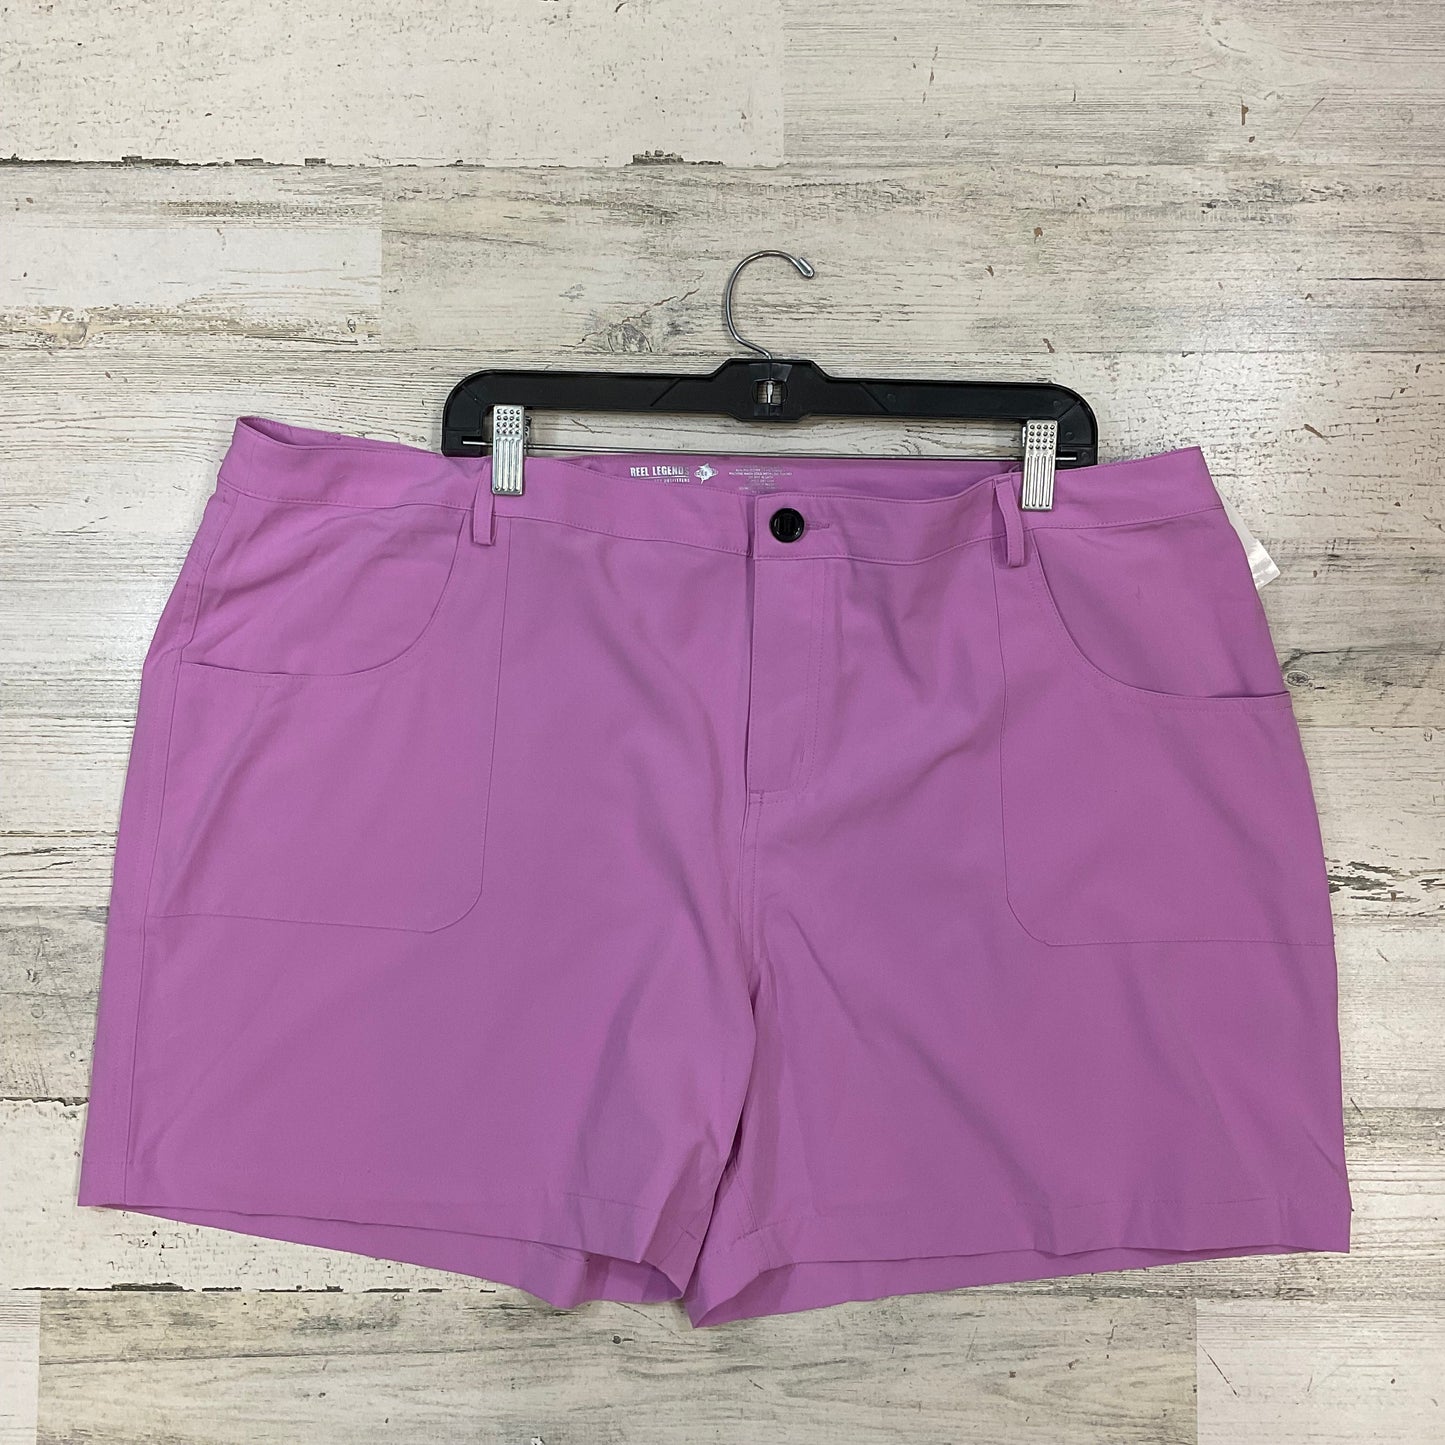 Shorts By Reel Legends  Size: 2x